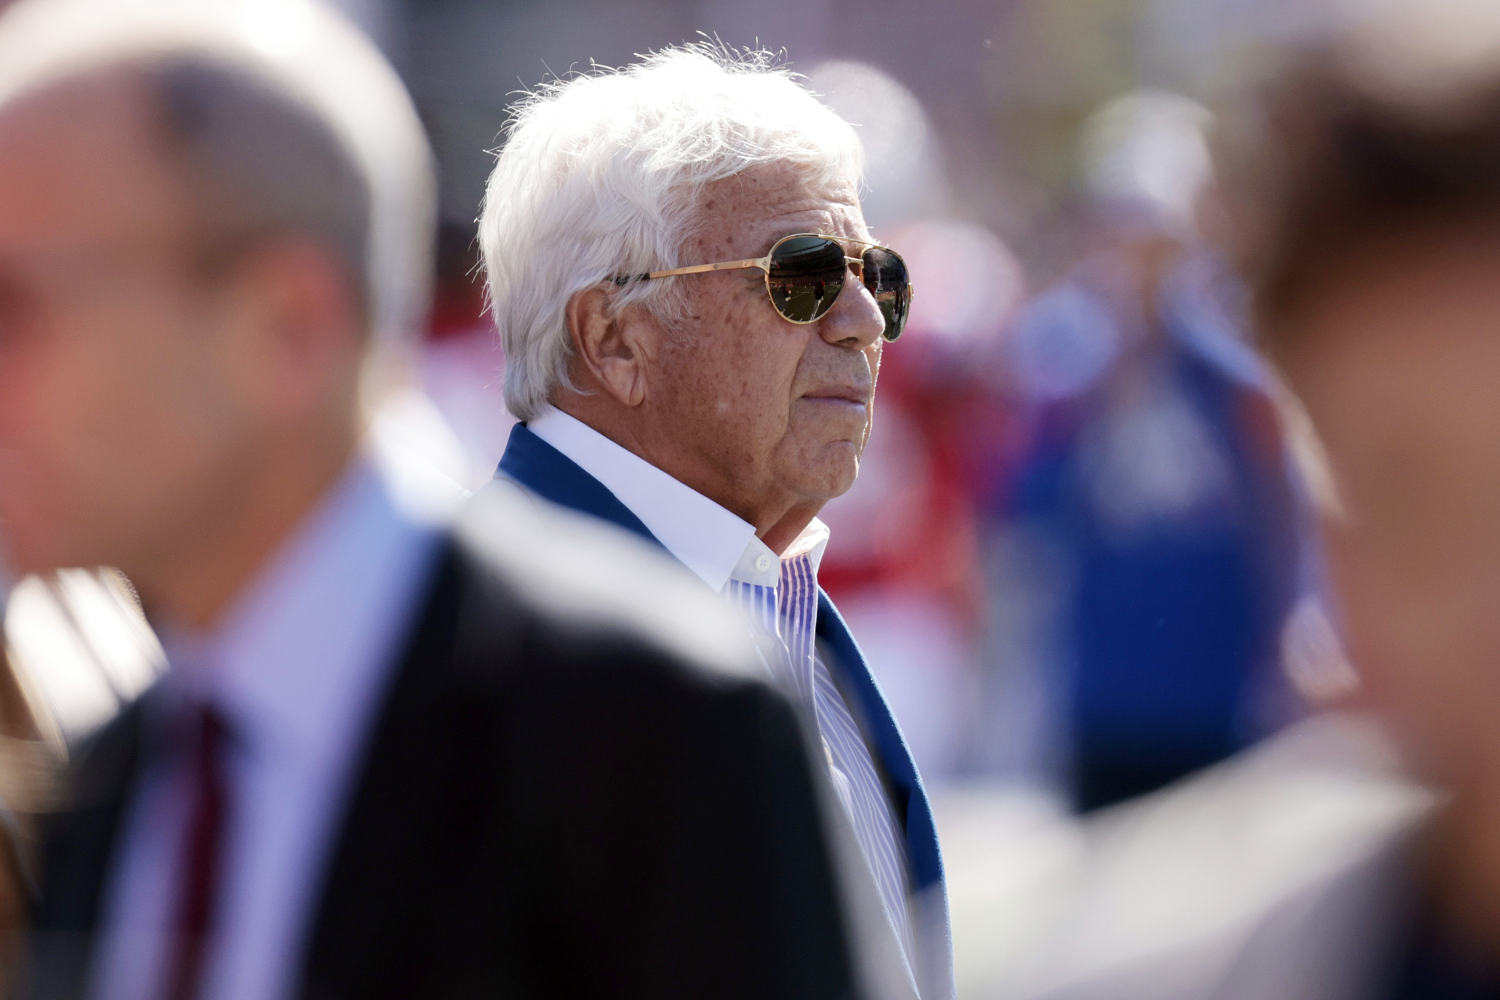 Patriots owner Robert Kraft: 'Jew-hatred' on U.S. college campuses is another parallel to Germany in 1930s and '40s